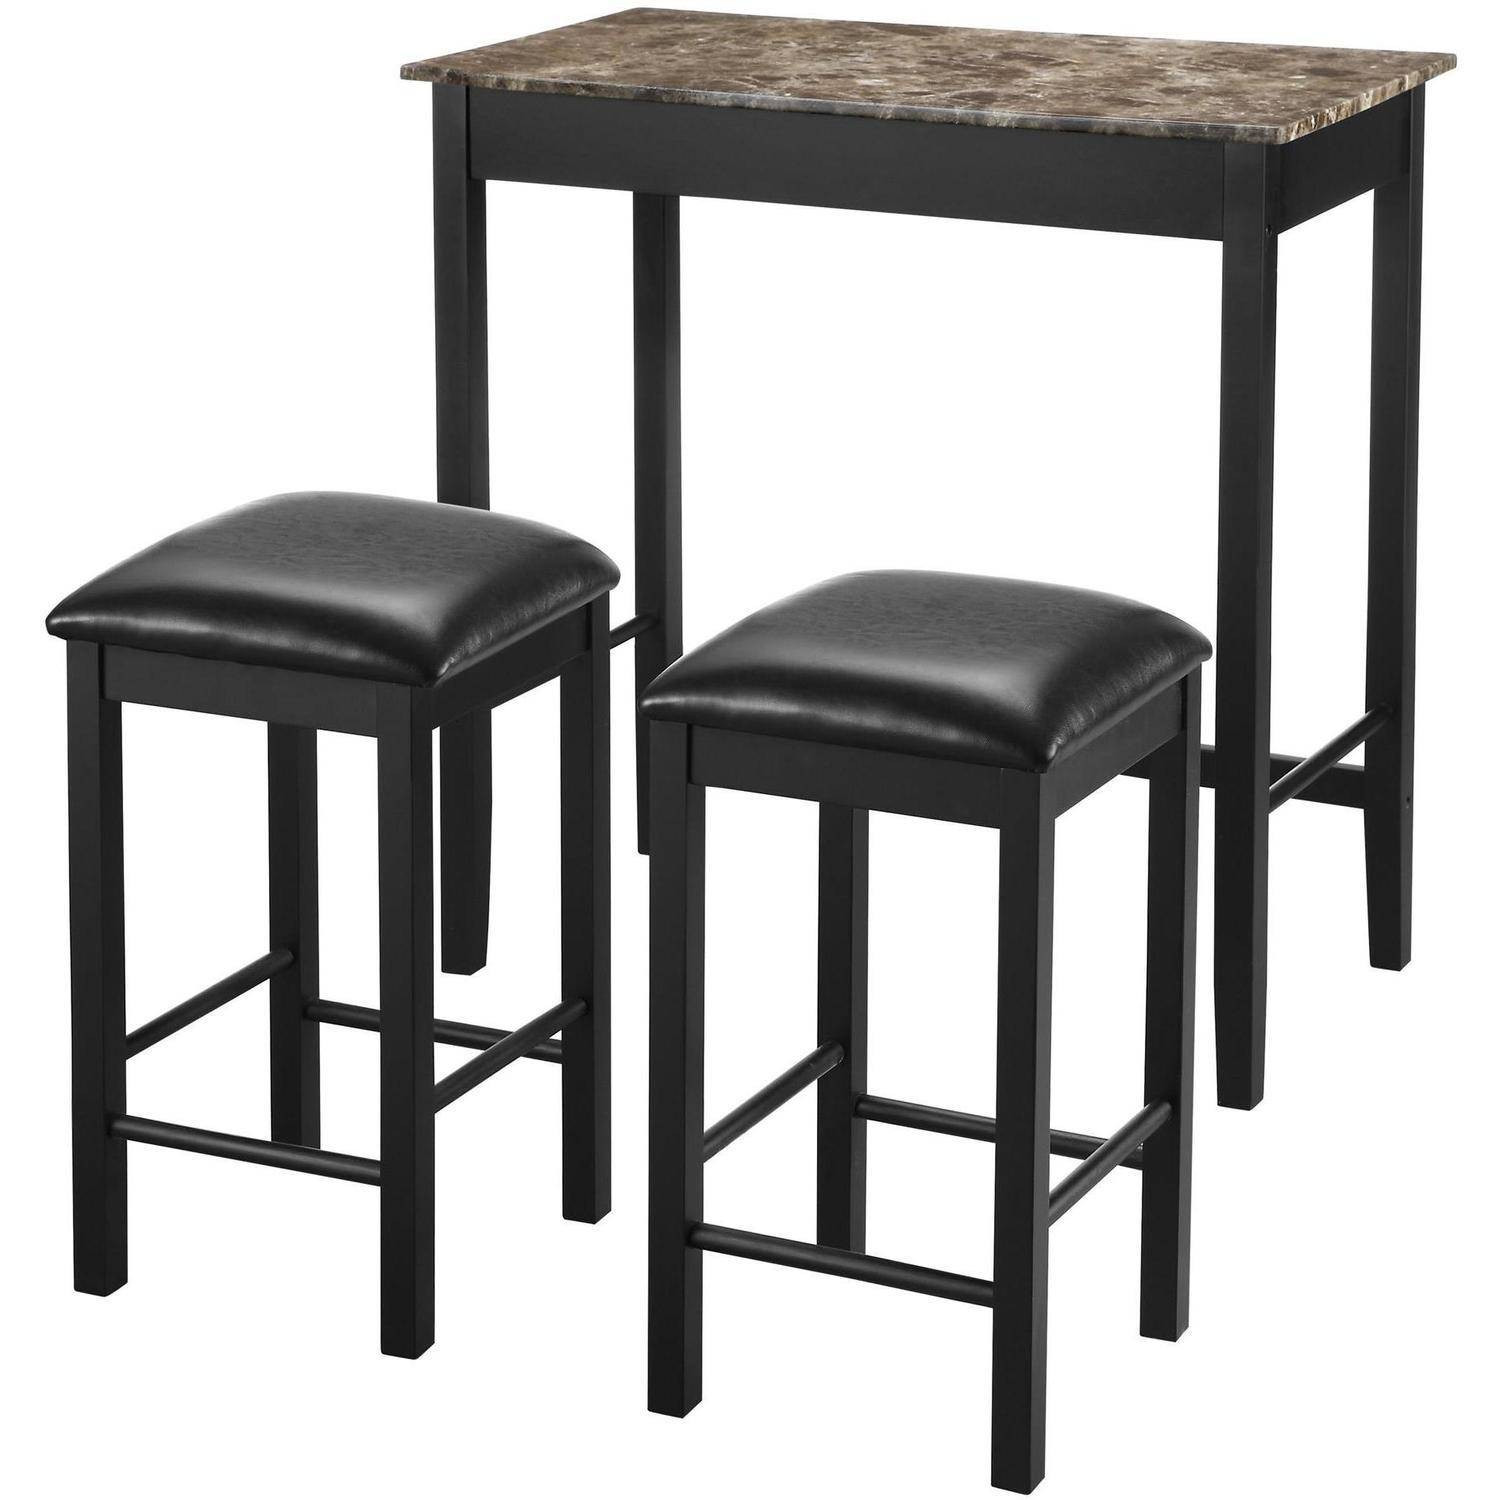 Small Kitchen Tables With Stools
 3 Pc Pub Bar Dining Set Small Space Saver Kitchen Nook